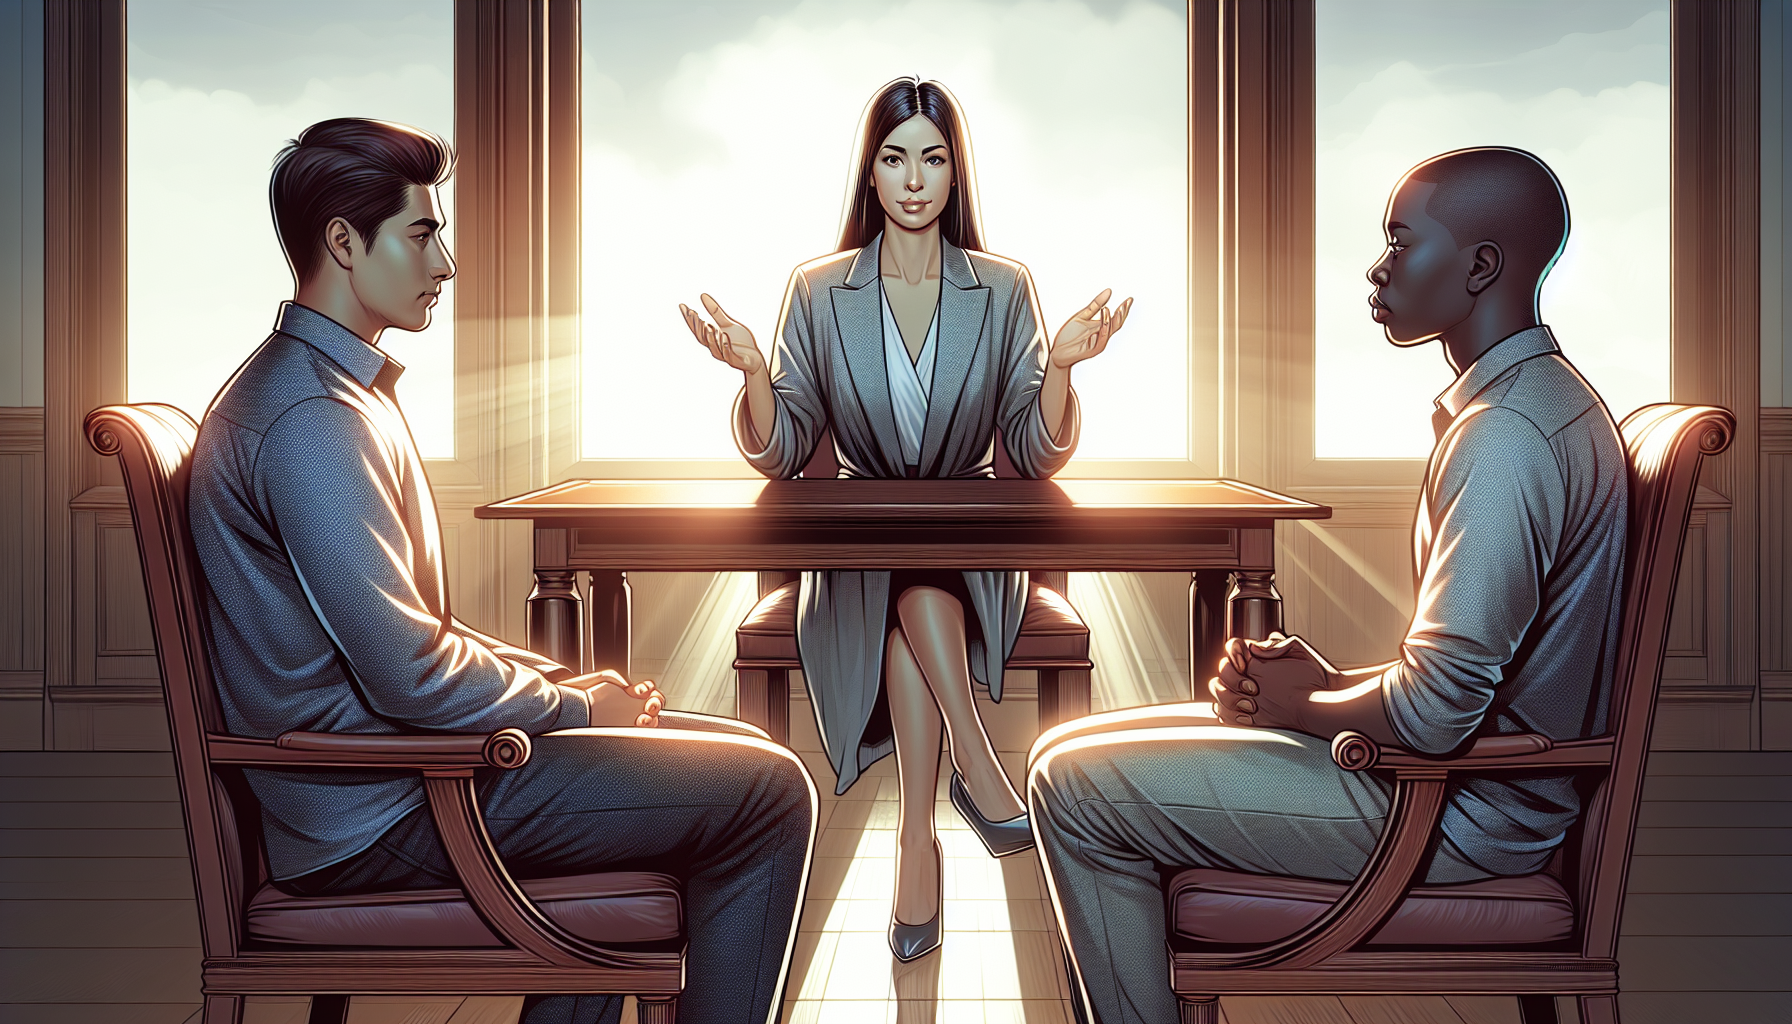 Illustration of a mediator facilitating communication between parties during family law mediation